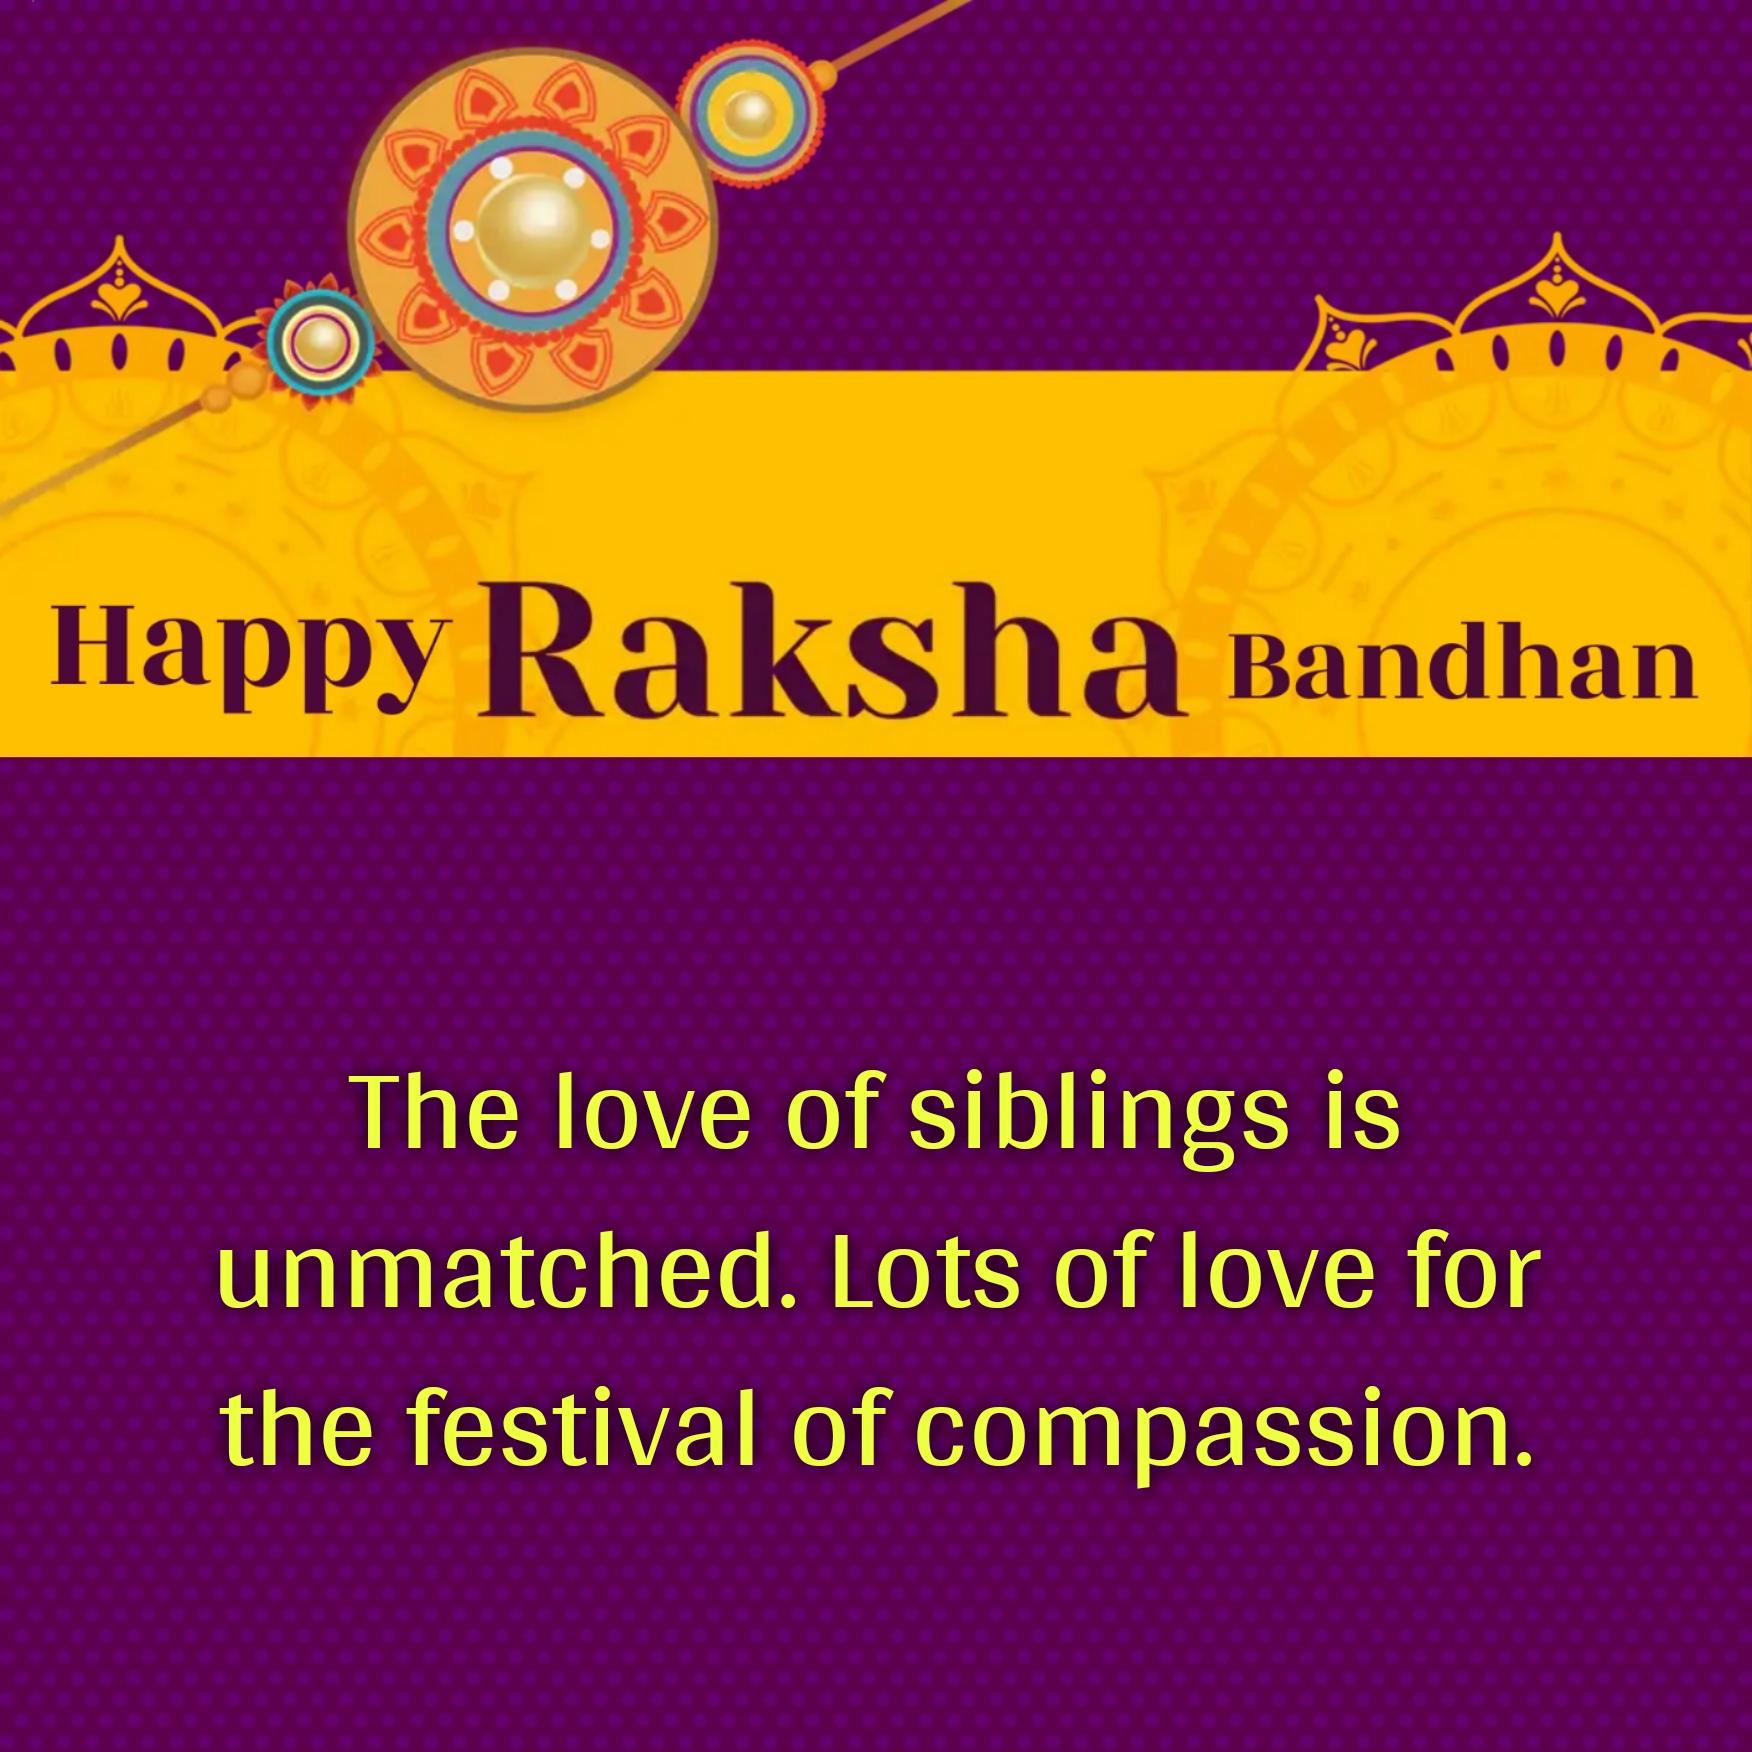 The love of siblings is unmatched Lots of love for the festival